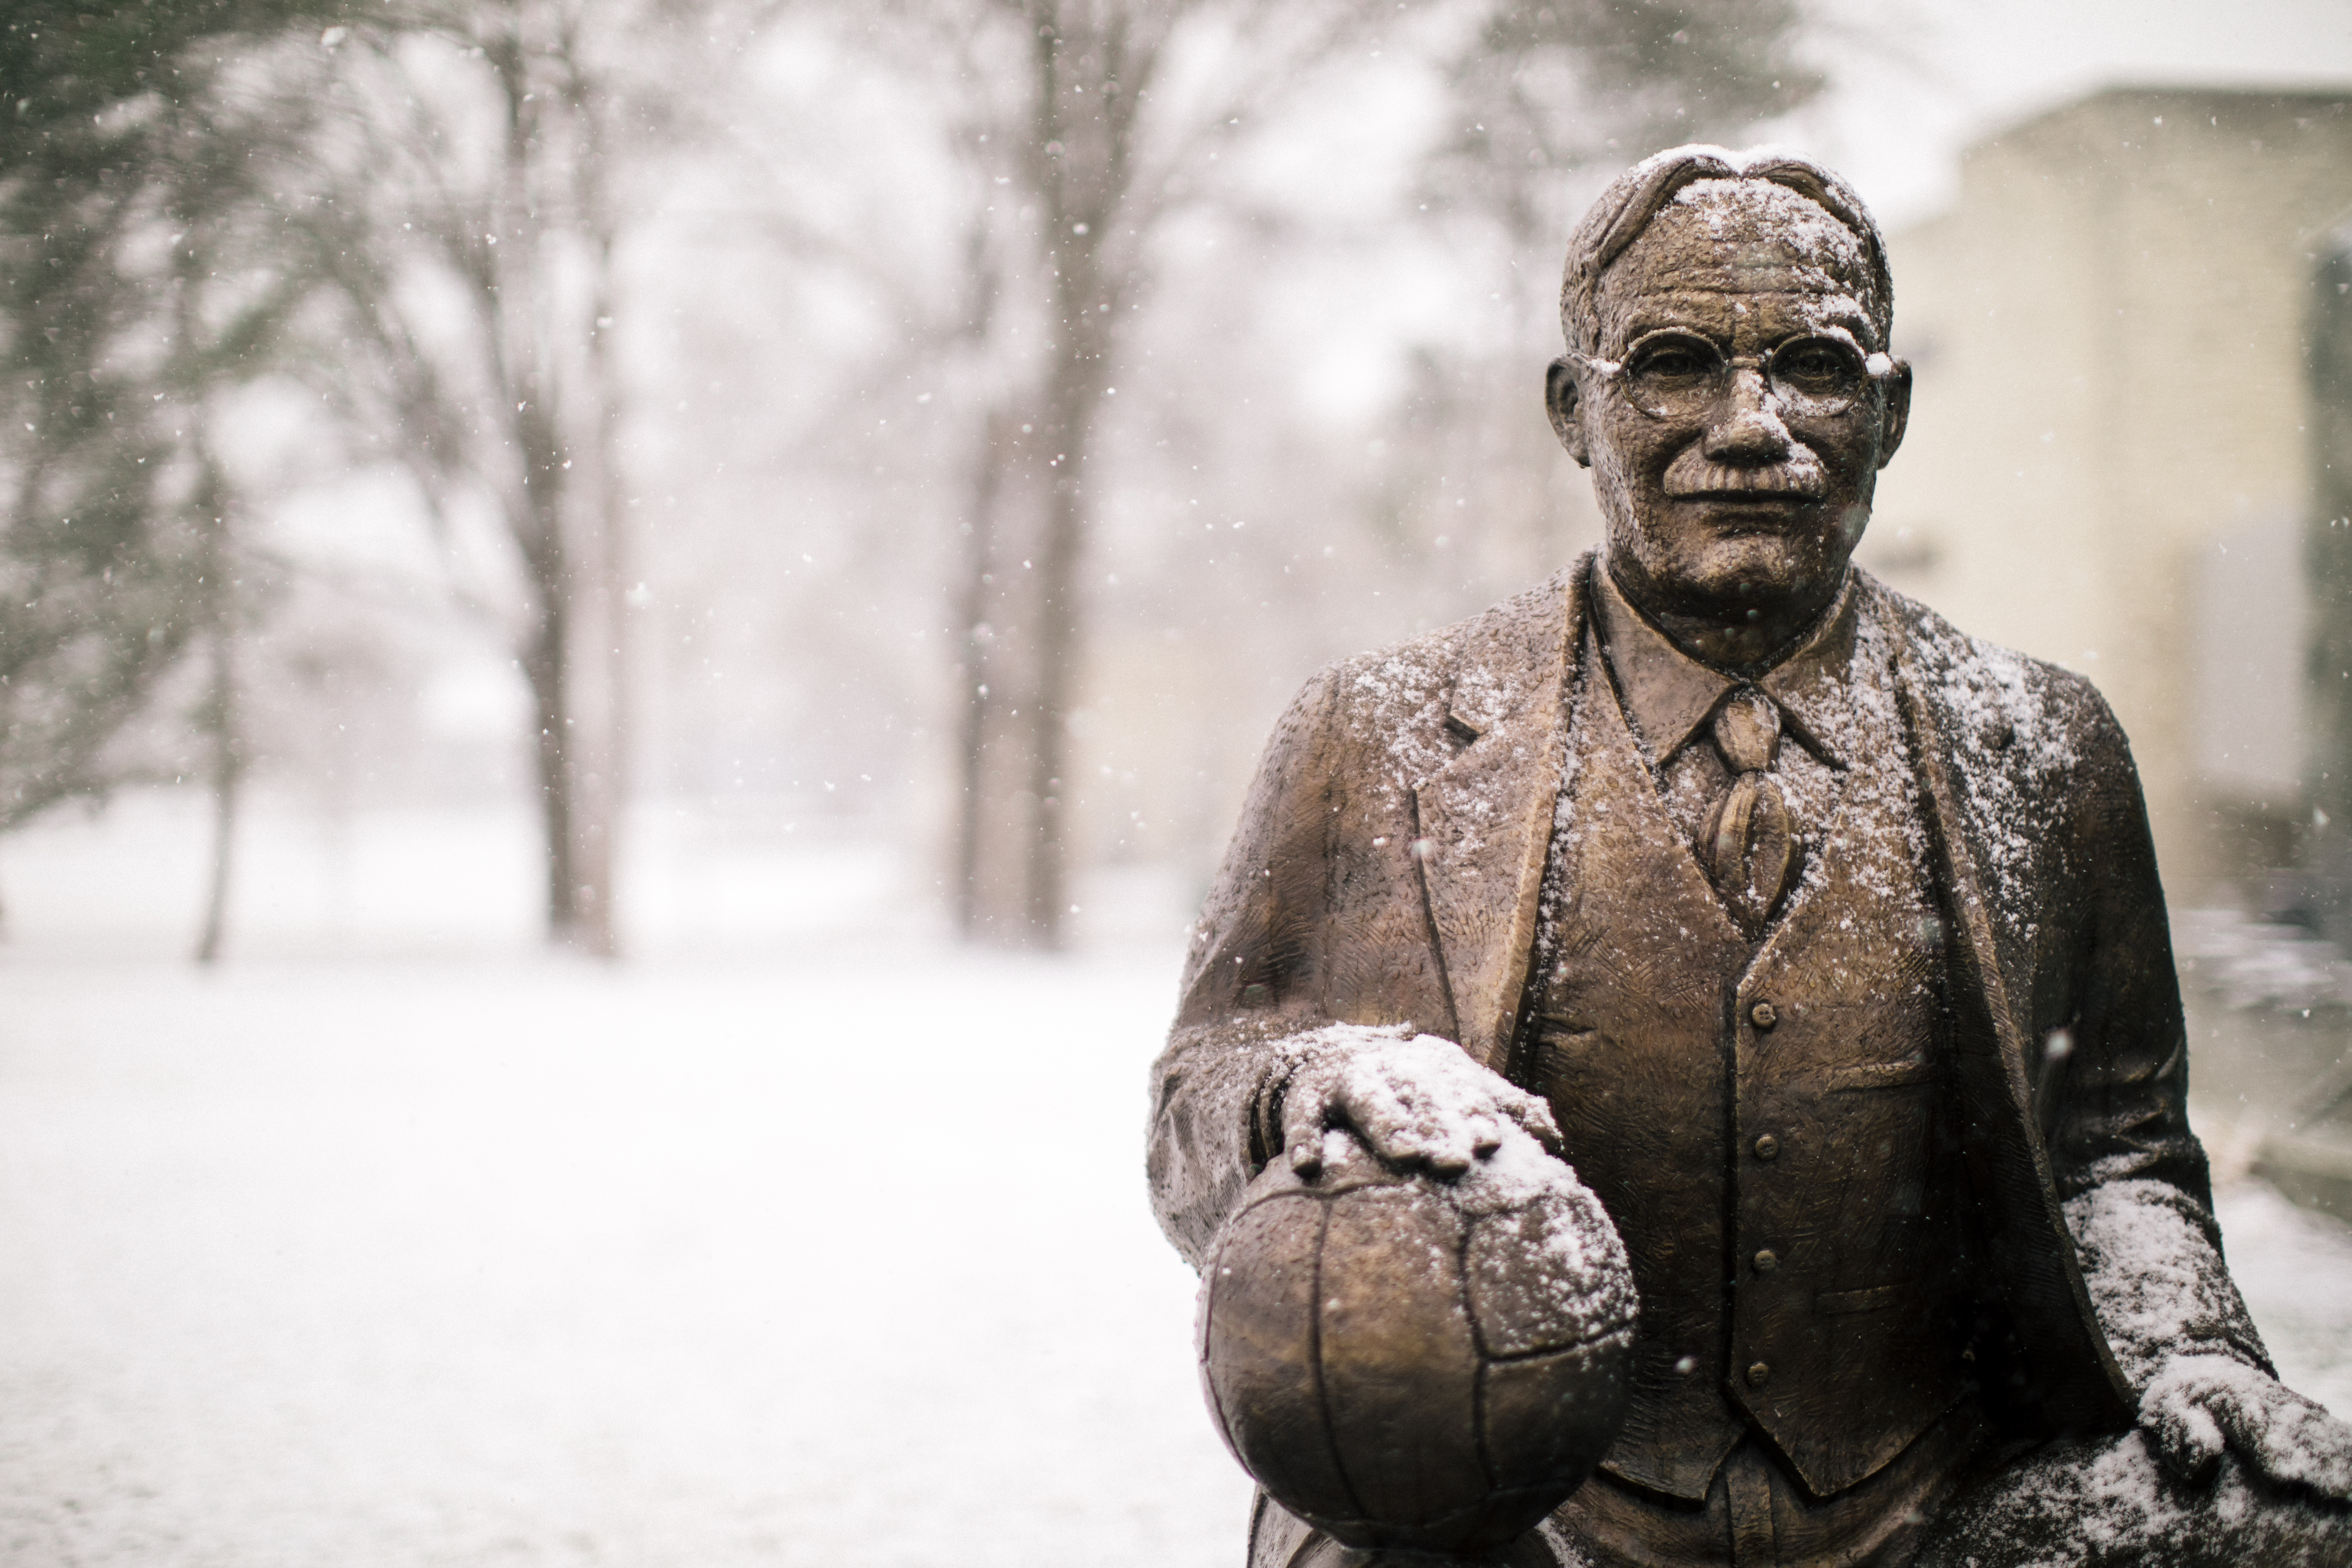 a statue of James Naismith outside of the DeBruce Center